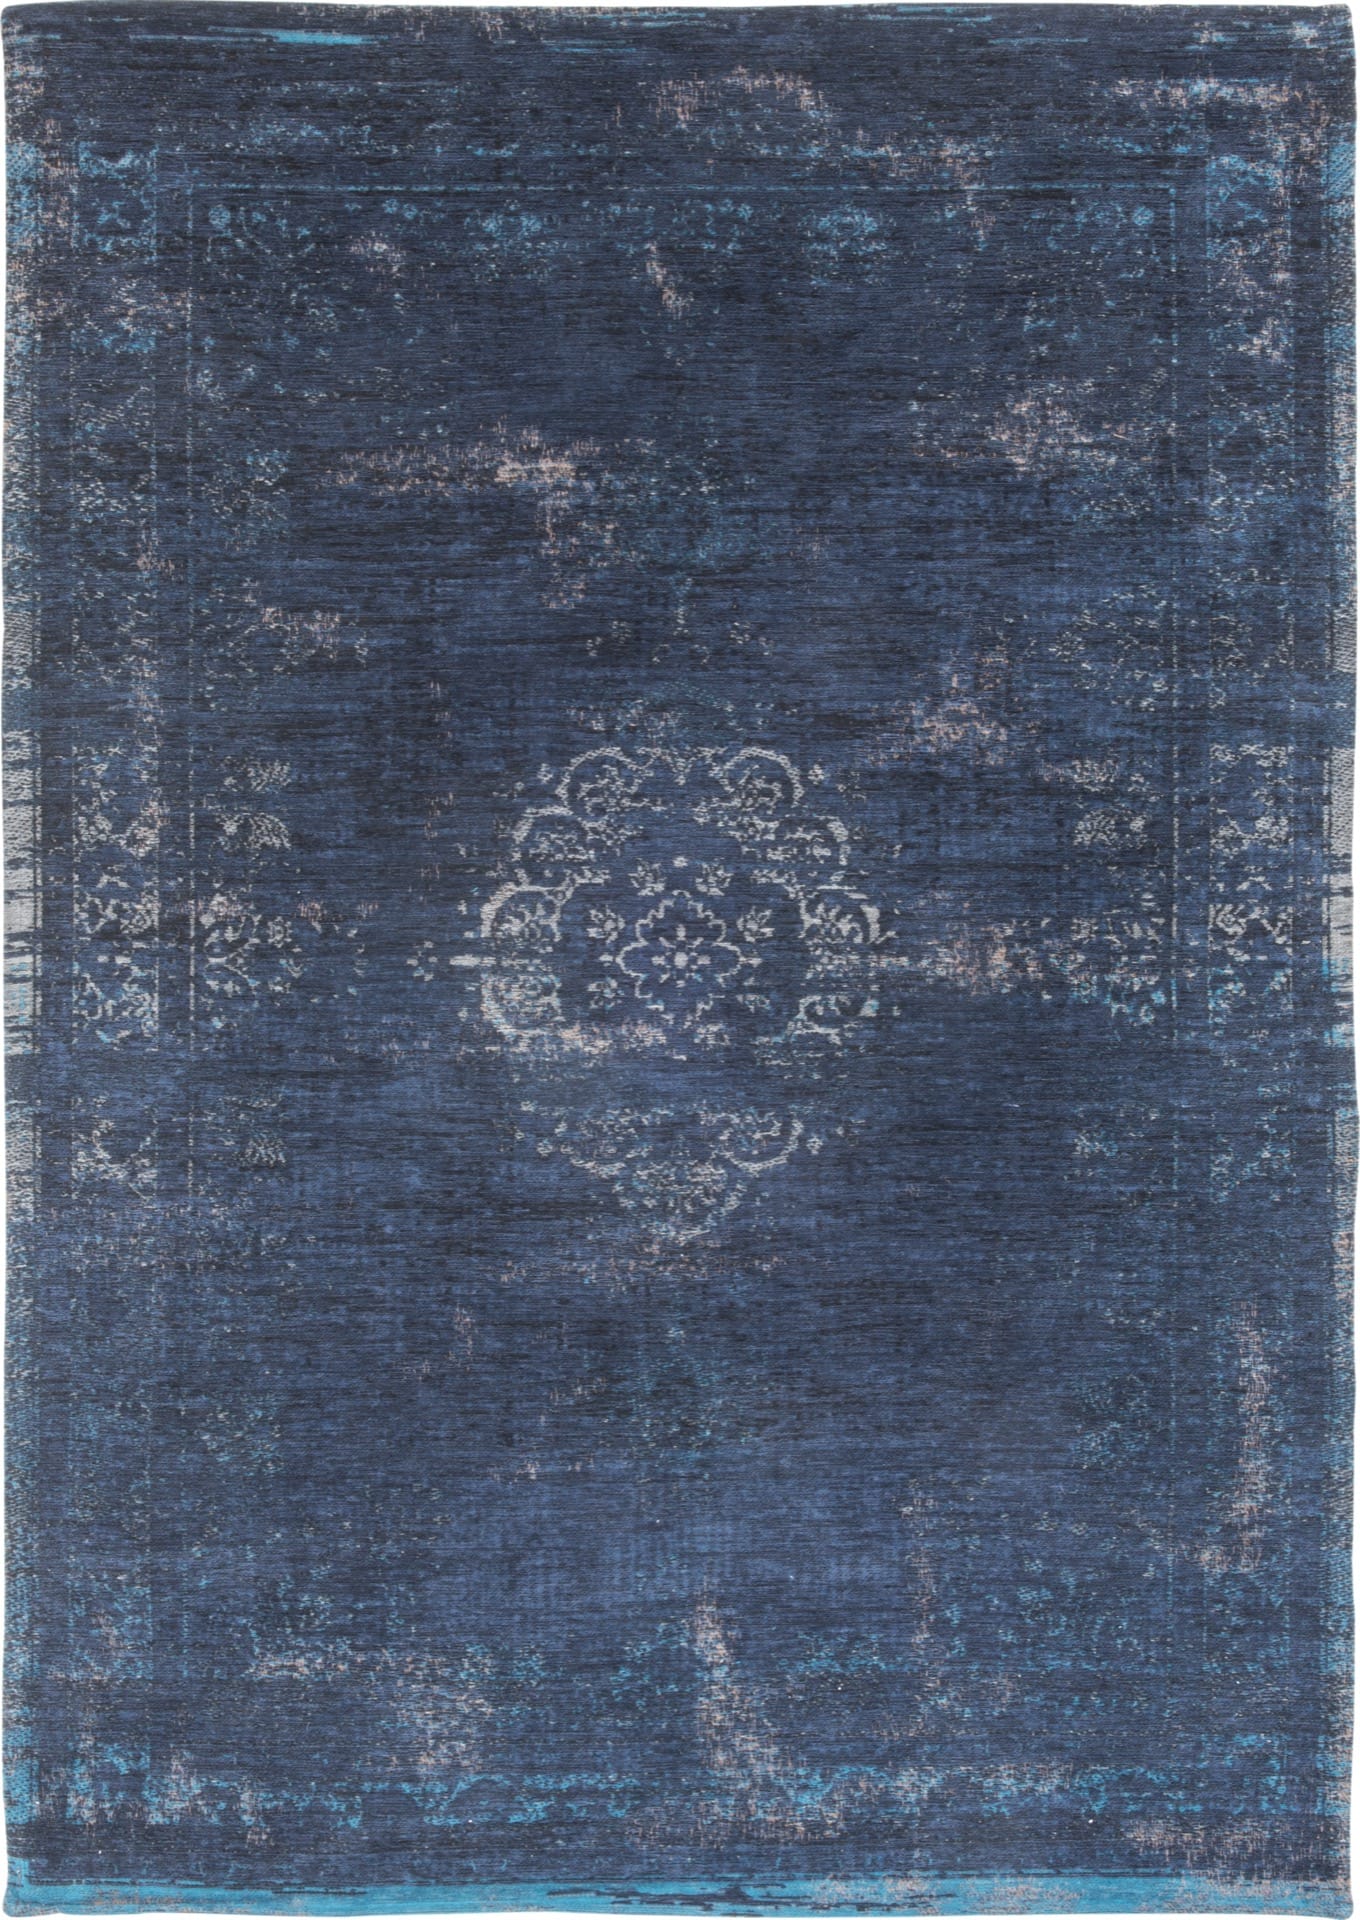 Fading World Collection Medallion Blue Night 8254 rug by Louis De Poortere